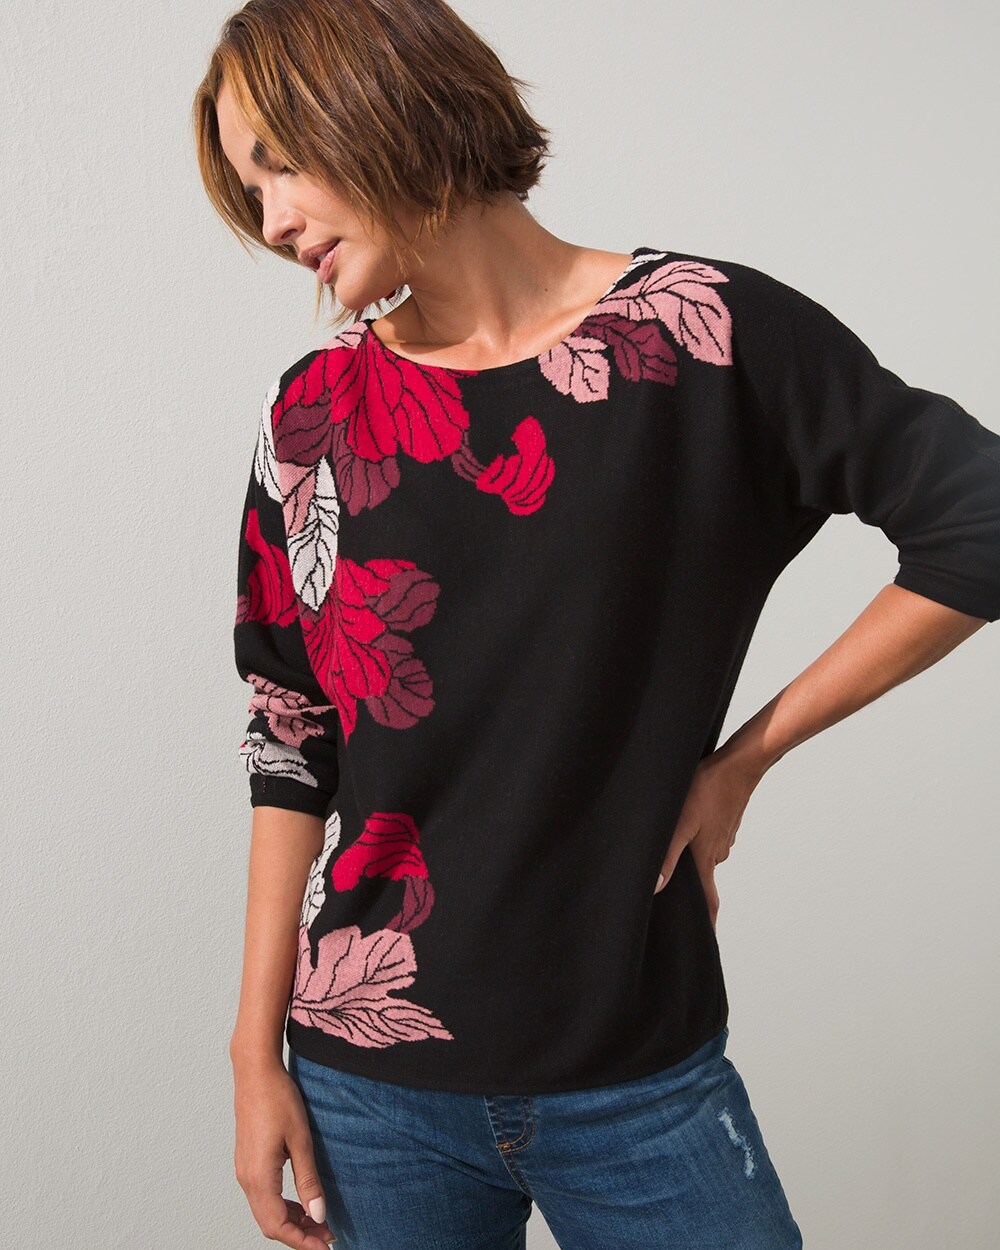 Floral Jacquard Pullover Sweater video preview image, click to start video